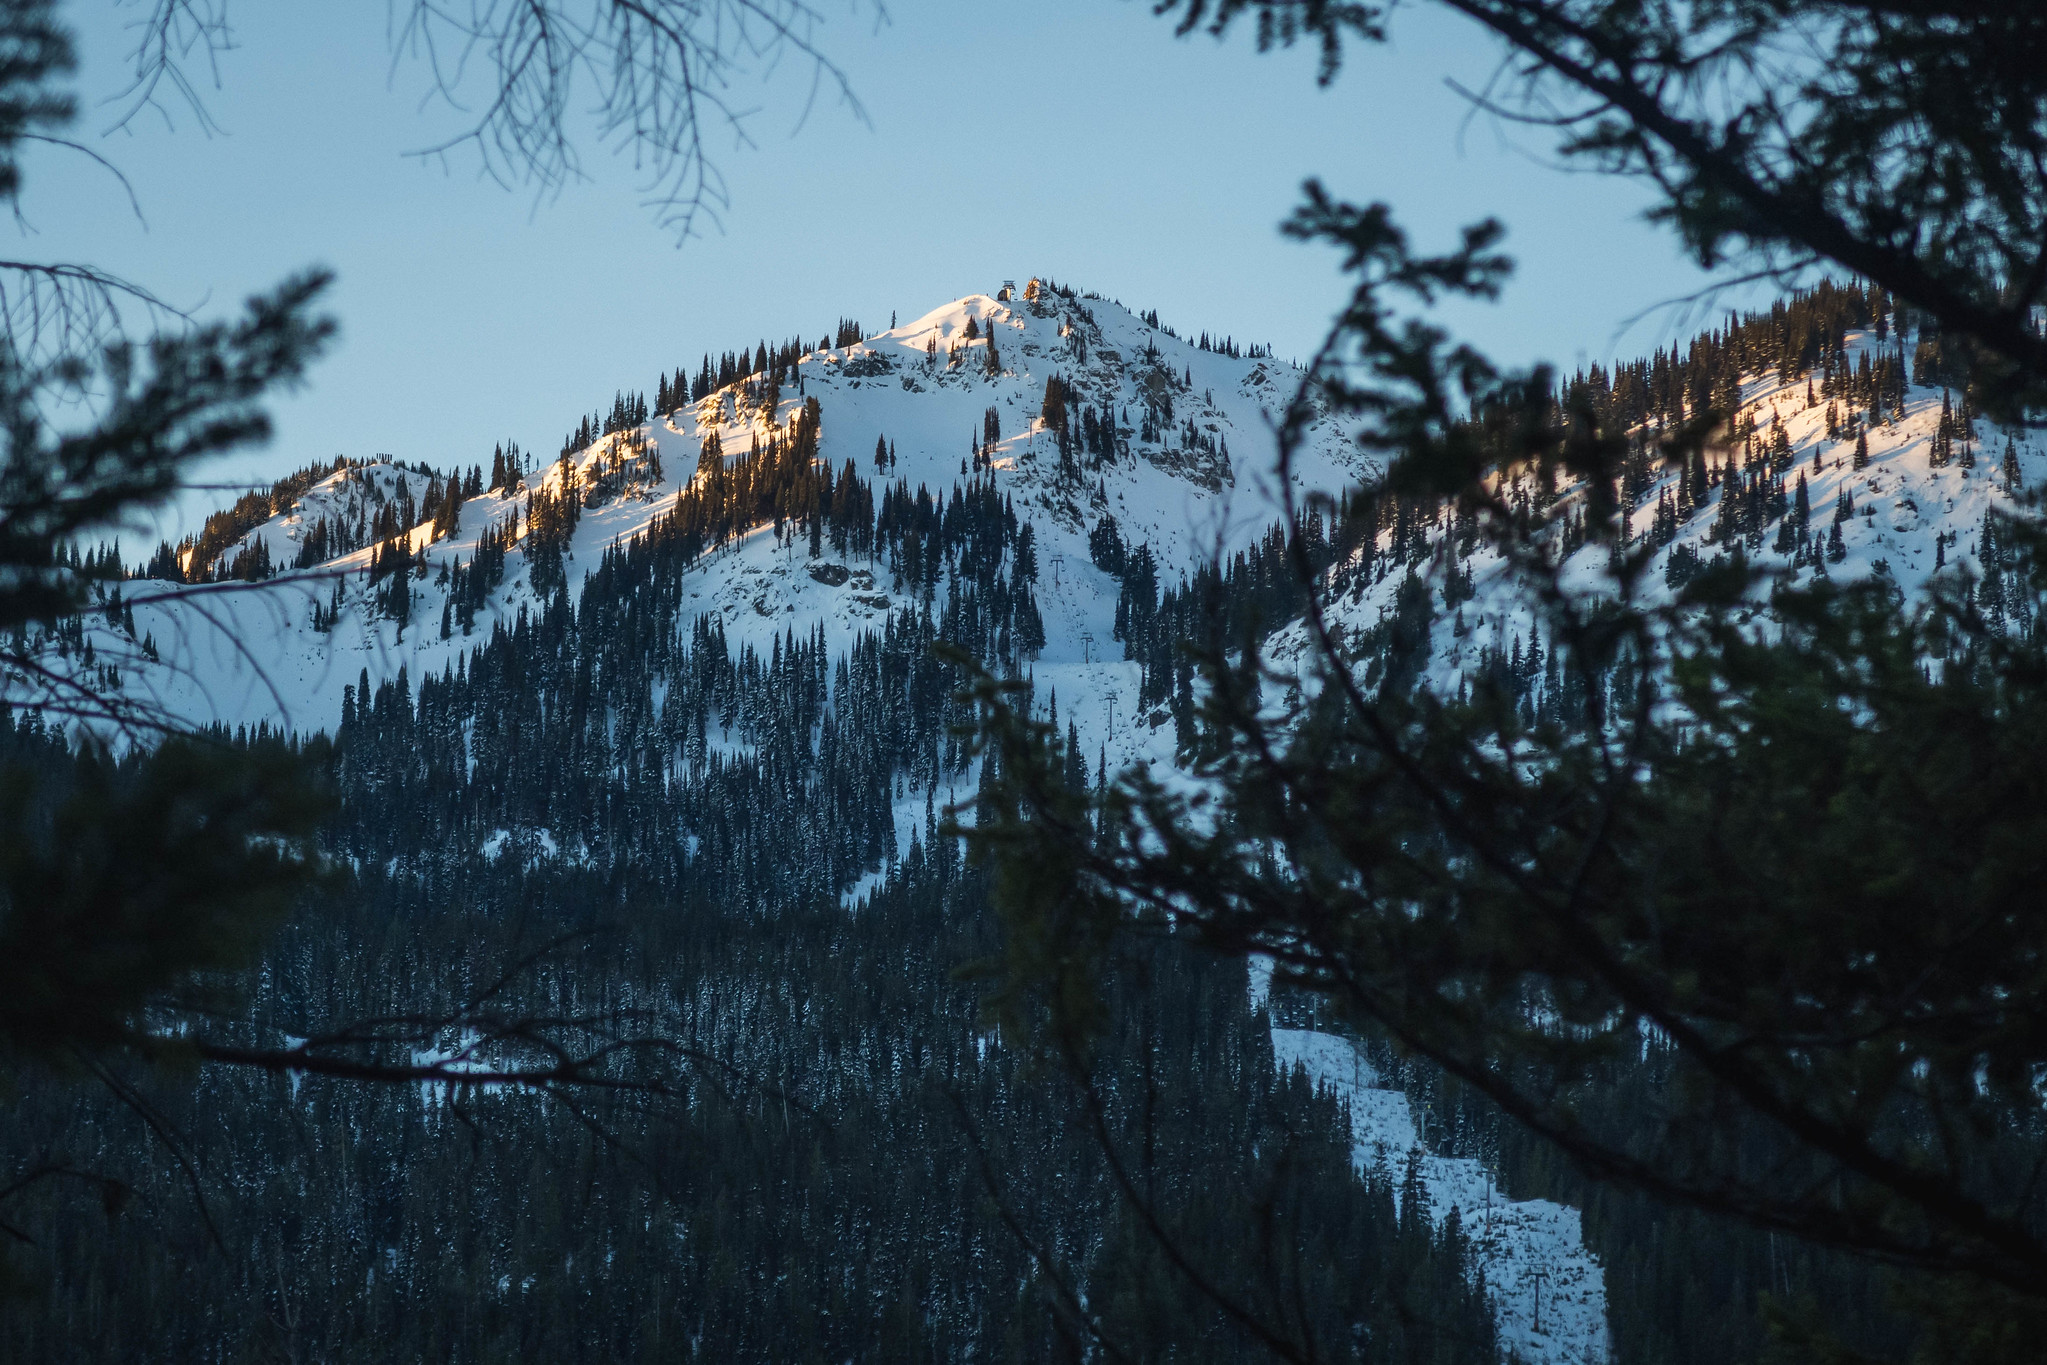 First light on Crystal Mountain